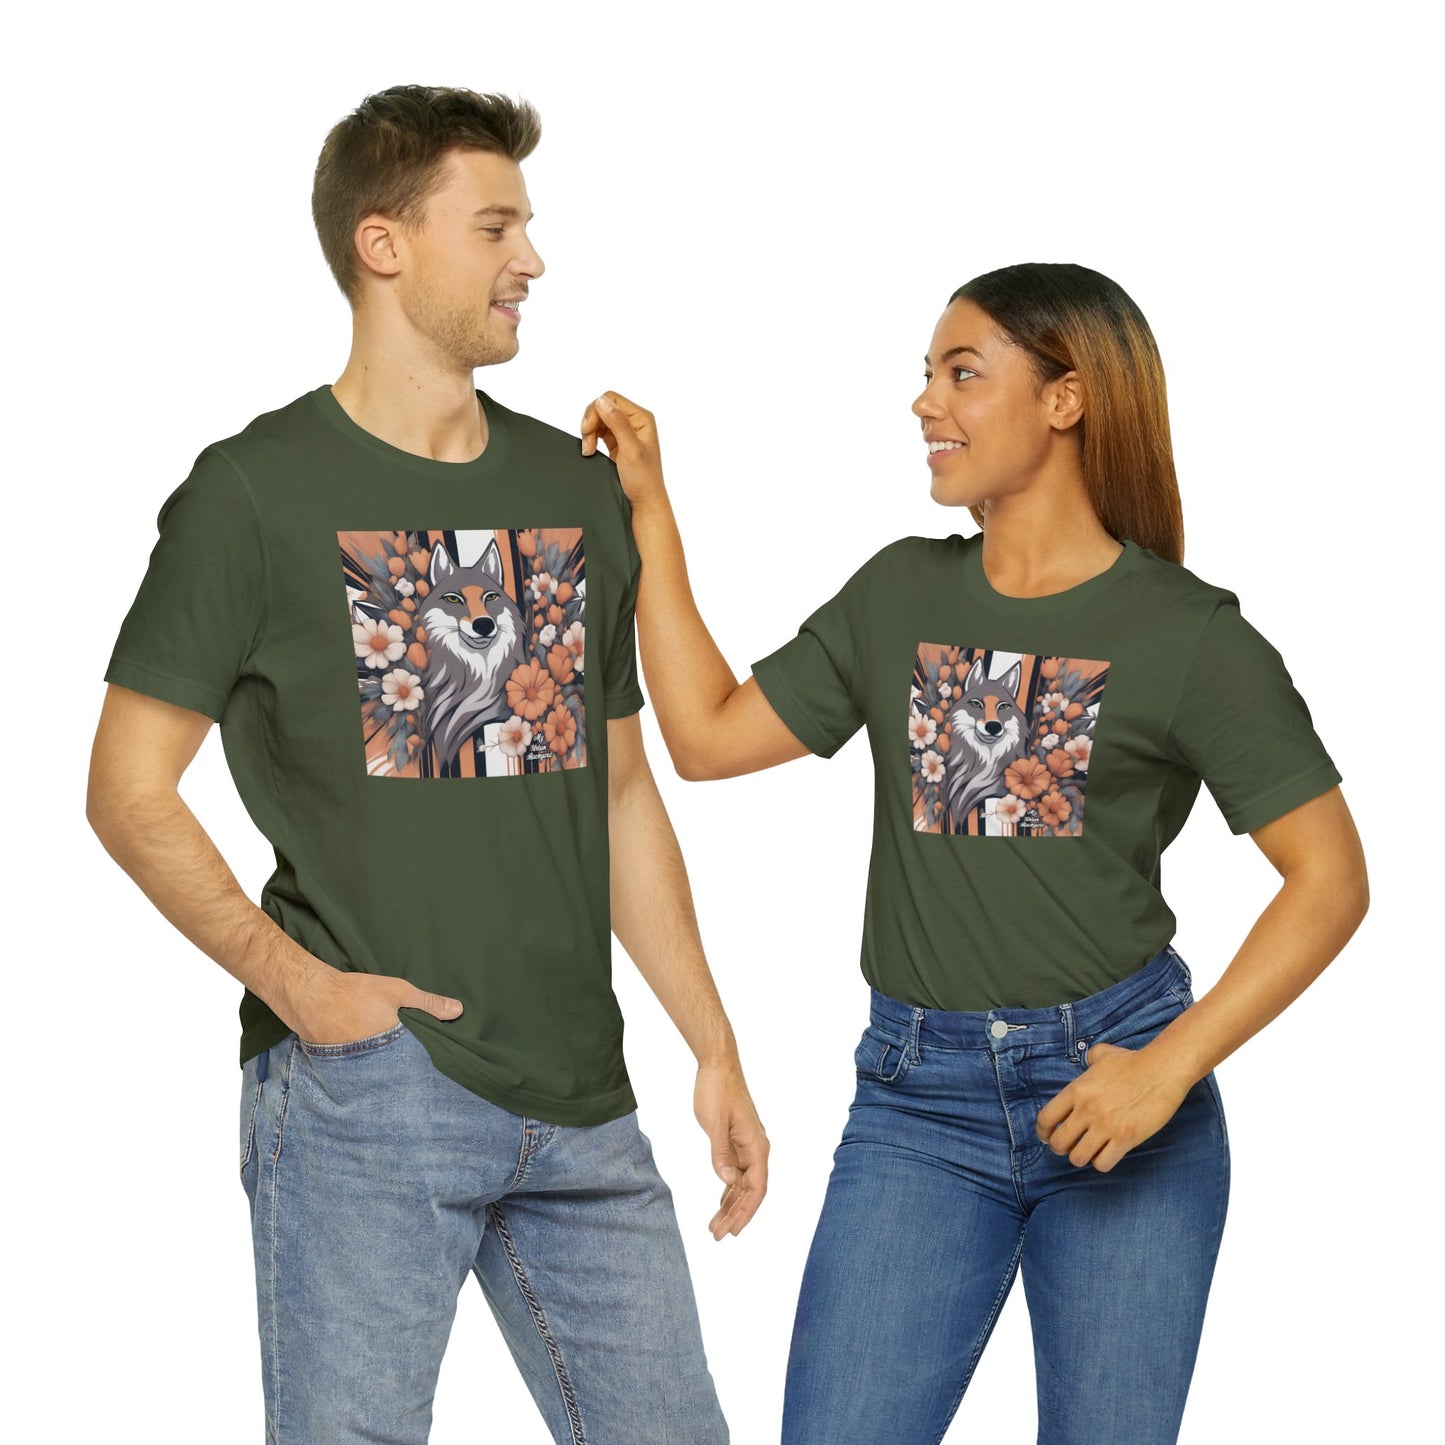 Urban Coyote, Soft 100% Jersey Cotton T-Shirt, Unisex, Short Sleeve, Retail Fit